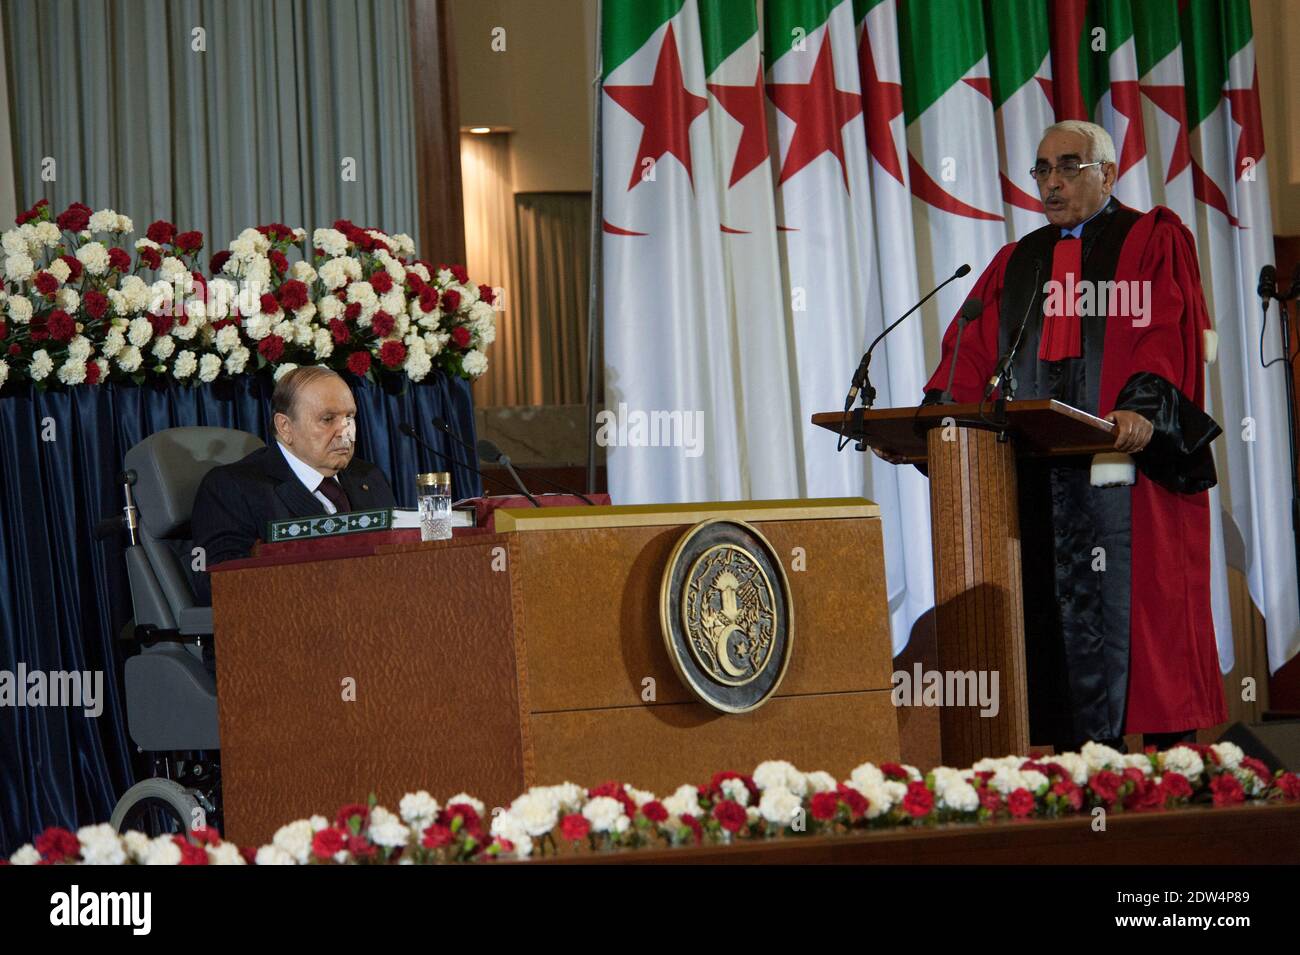 Algerian President Abdulaziz Bouteflika sits in his wheelchair on stage during his inauguration ceremony as he is sworn as Algeria's President for a fourth term in Algiers, Algeria, on April 28, 2014. Official results showed that Bouteflika won 81.5 percent of the votes in an election marred by low turnout and claims of fraud by his opponents, including main rival Ali Benflis, who received just 12.18 percent. Photo by Ammi Louiza/ABACAPRESS.COM Stock Photo